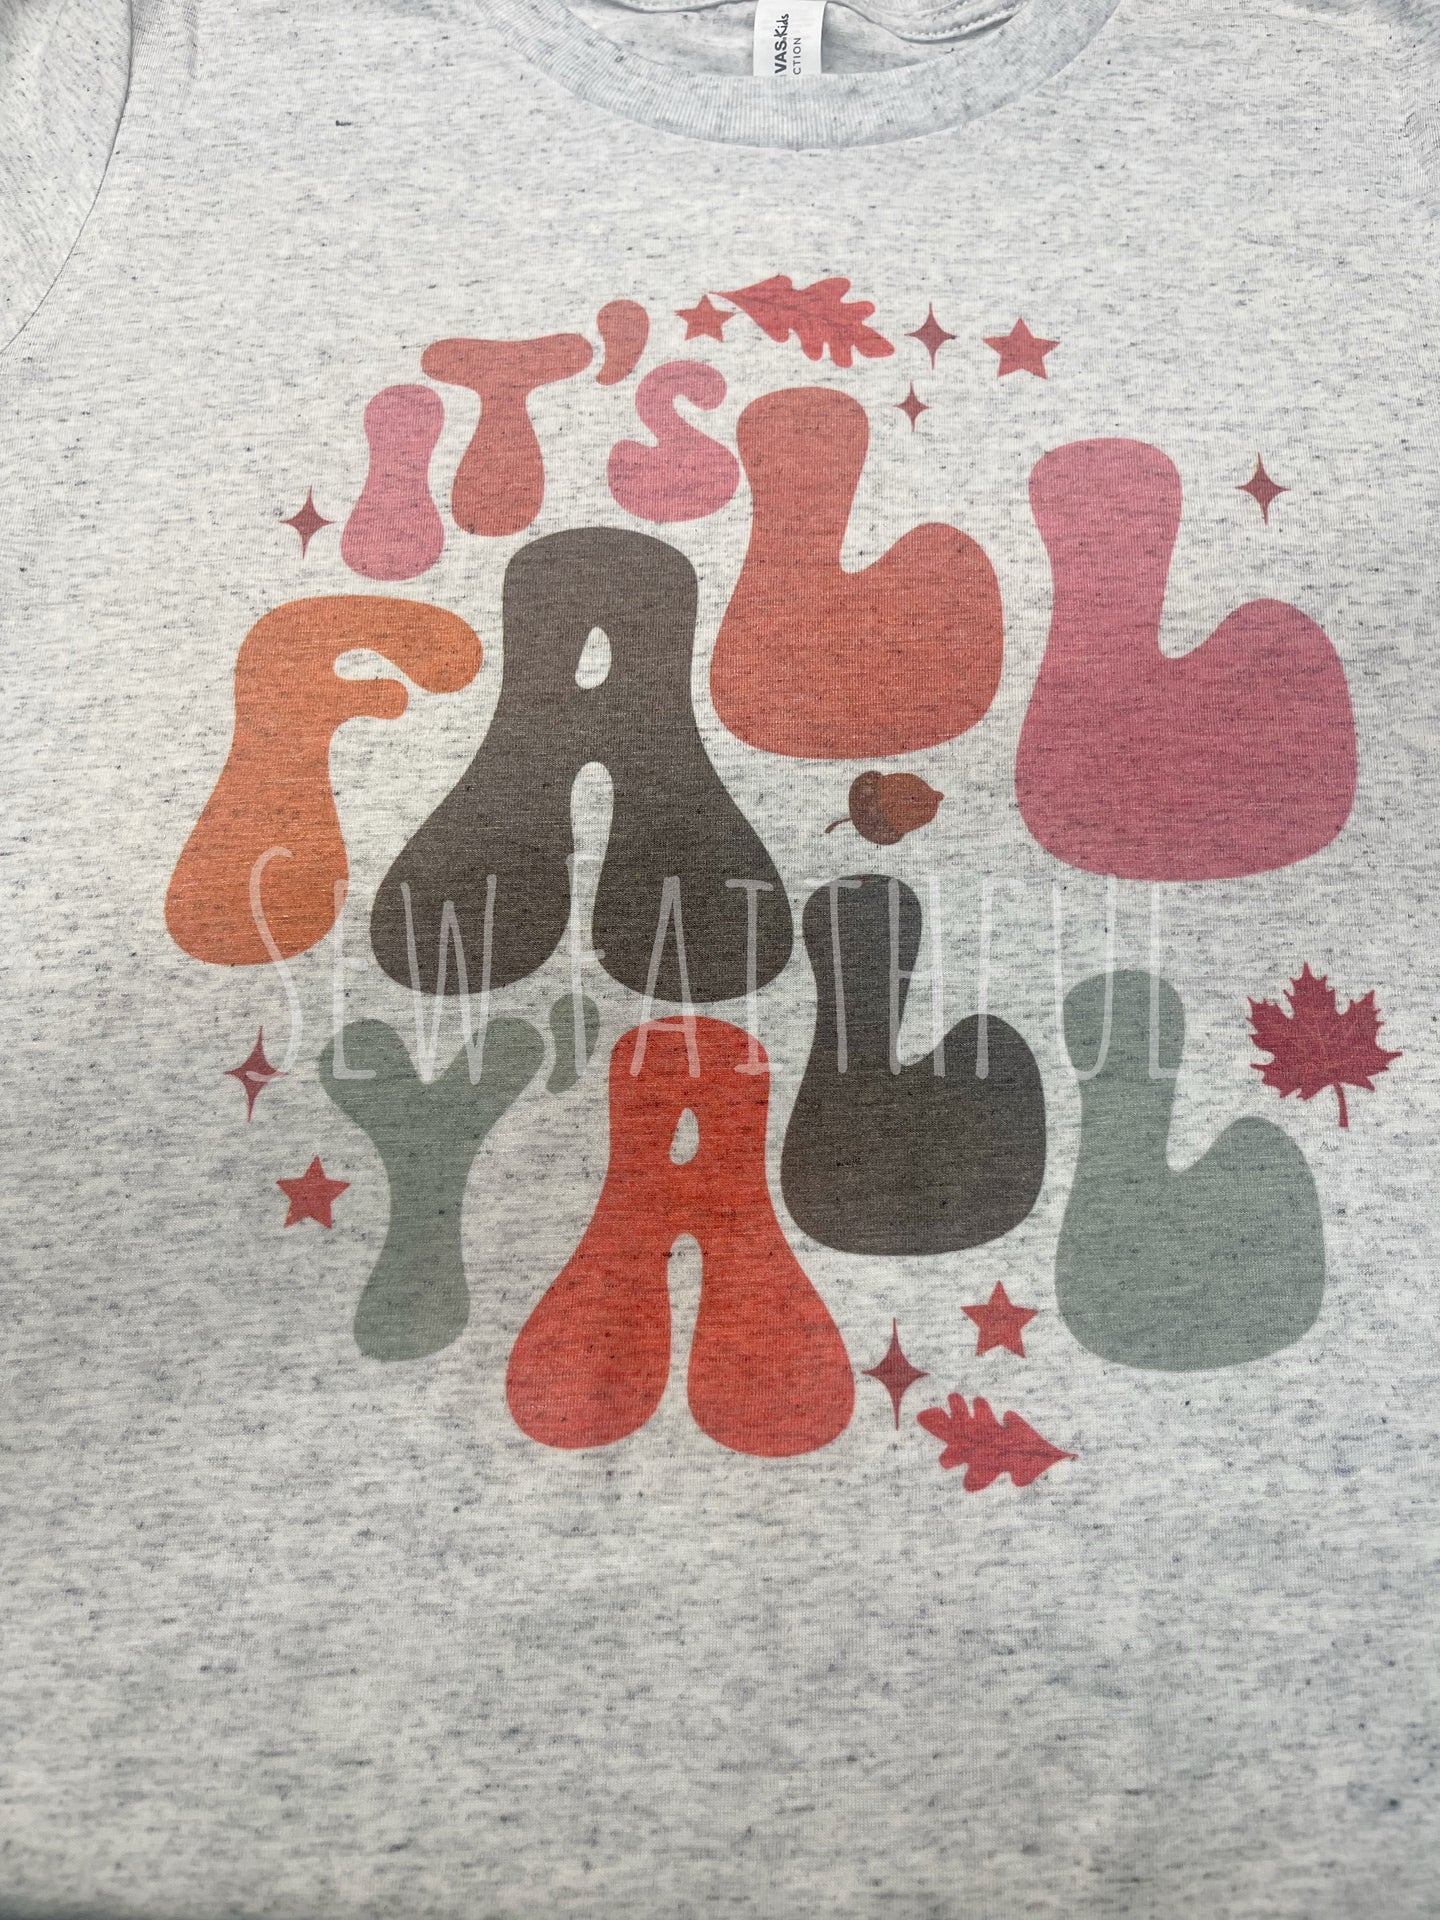 It's Fall Y'all - Sublimation